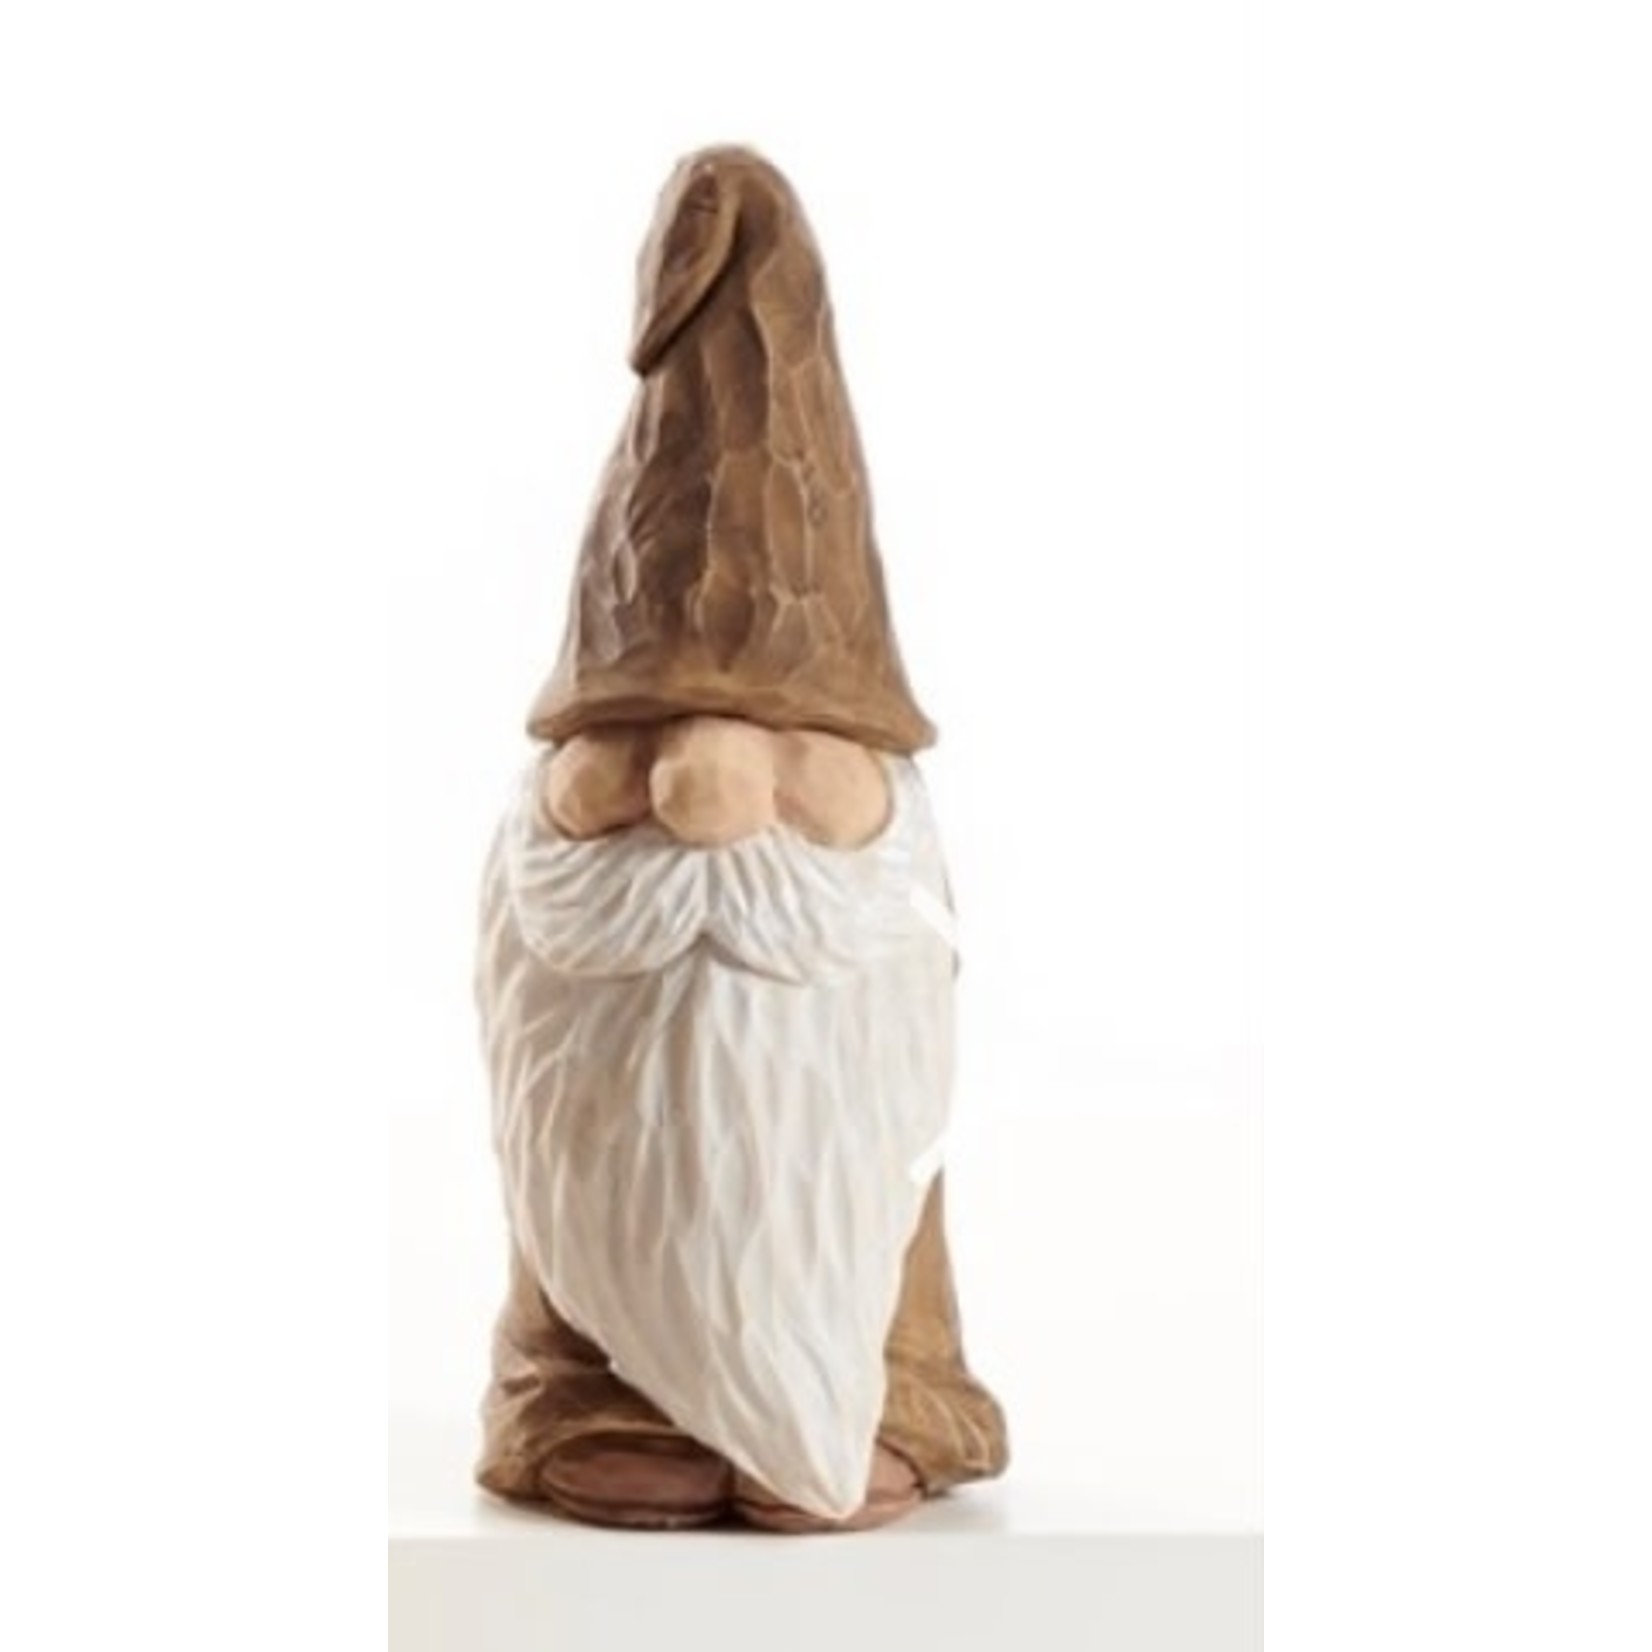 Giftcraft Carved Gnome Figurine